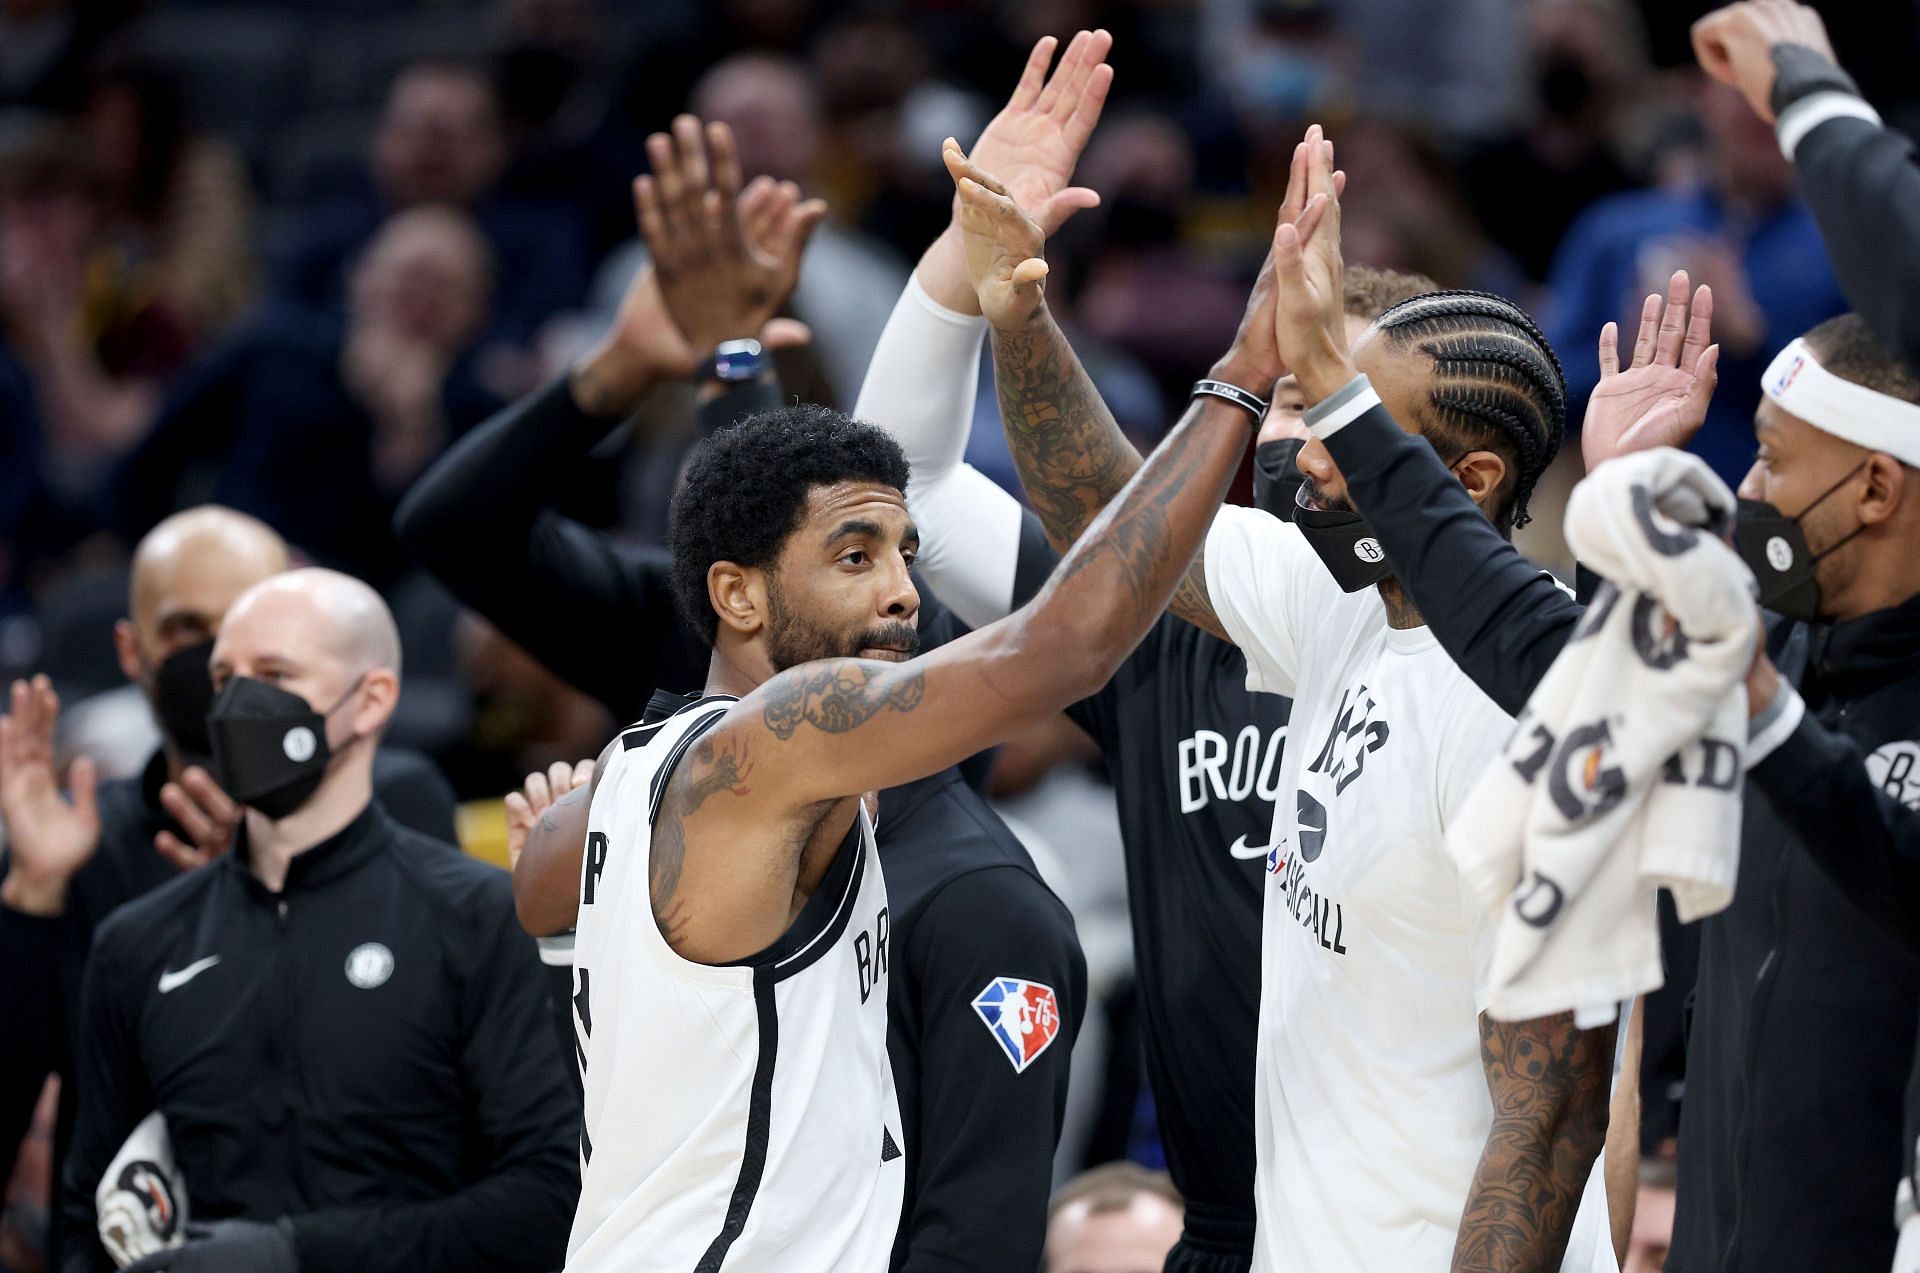 Kyrie Irving #11of the Brooklyn Nets celebrates with teammates as he leaves the game in the fourth quarter against the Indiana Pacers at Gainbridge Fieldhouse on January 05, 2022 in Indianapolis, Indiana.